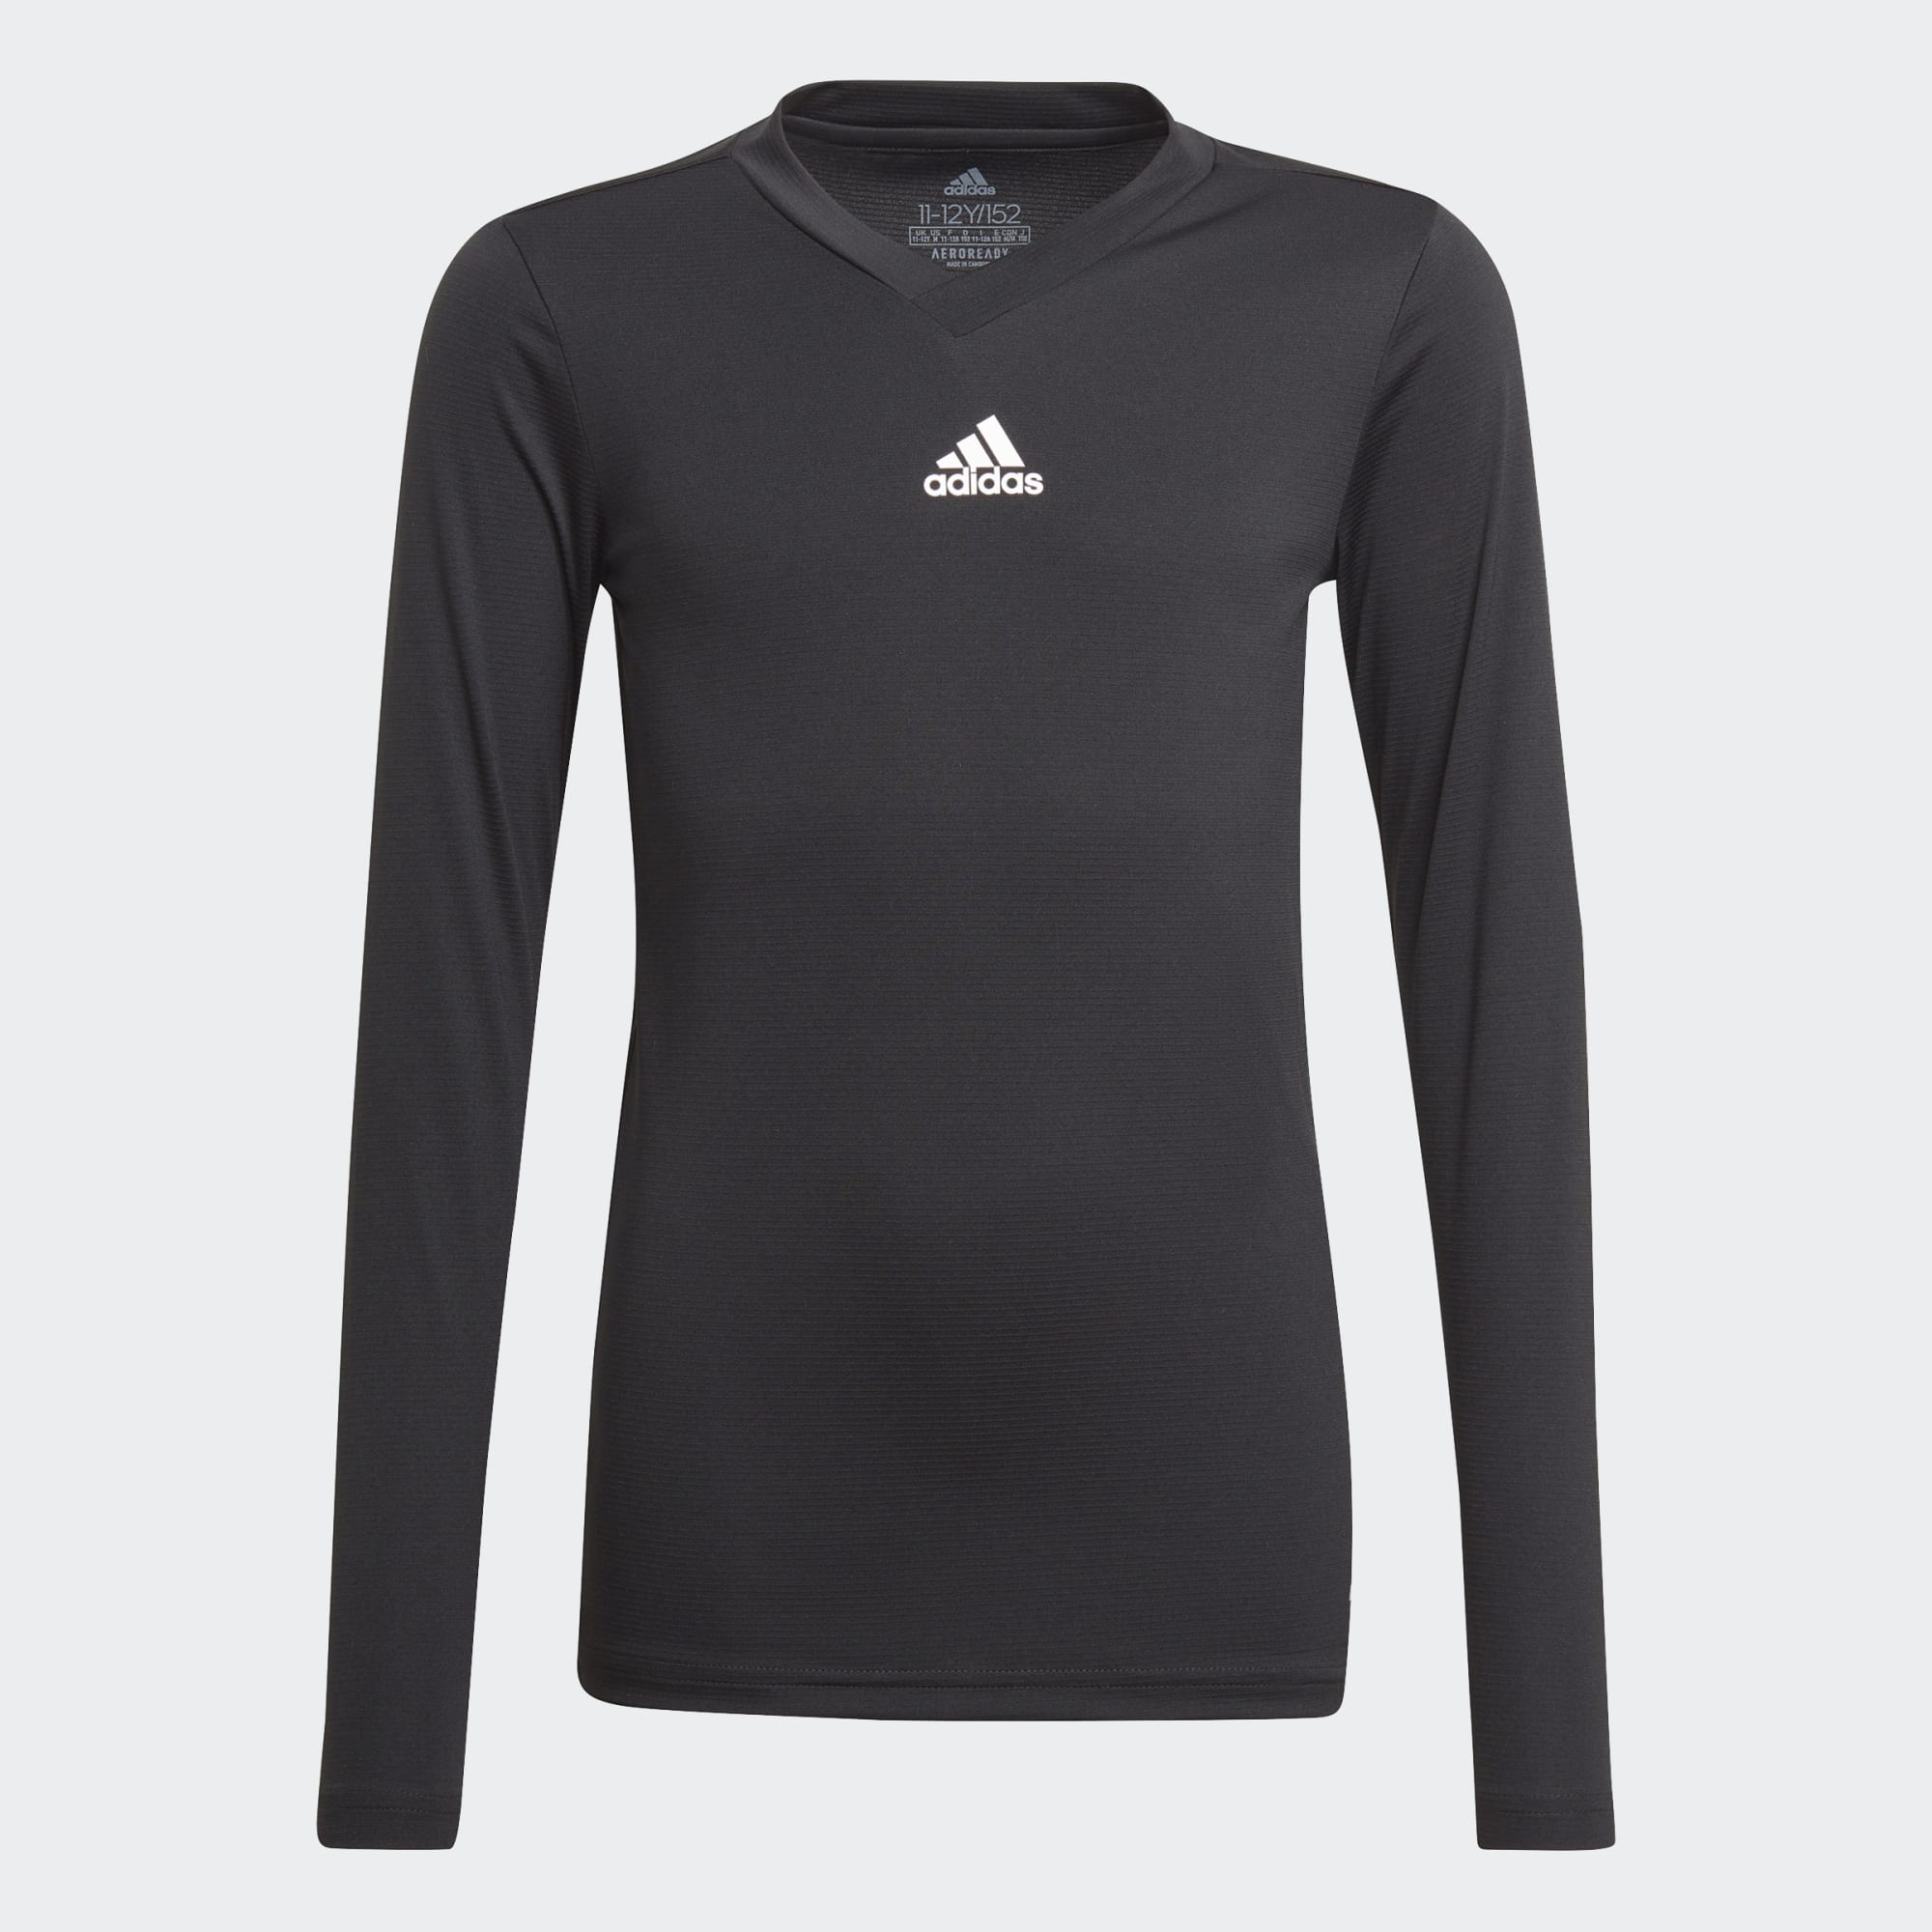 Adidas Team Base Youth Long Sleeve T-Shirt-Adidas-Sports Replay - Sports Excellence